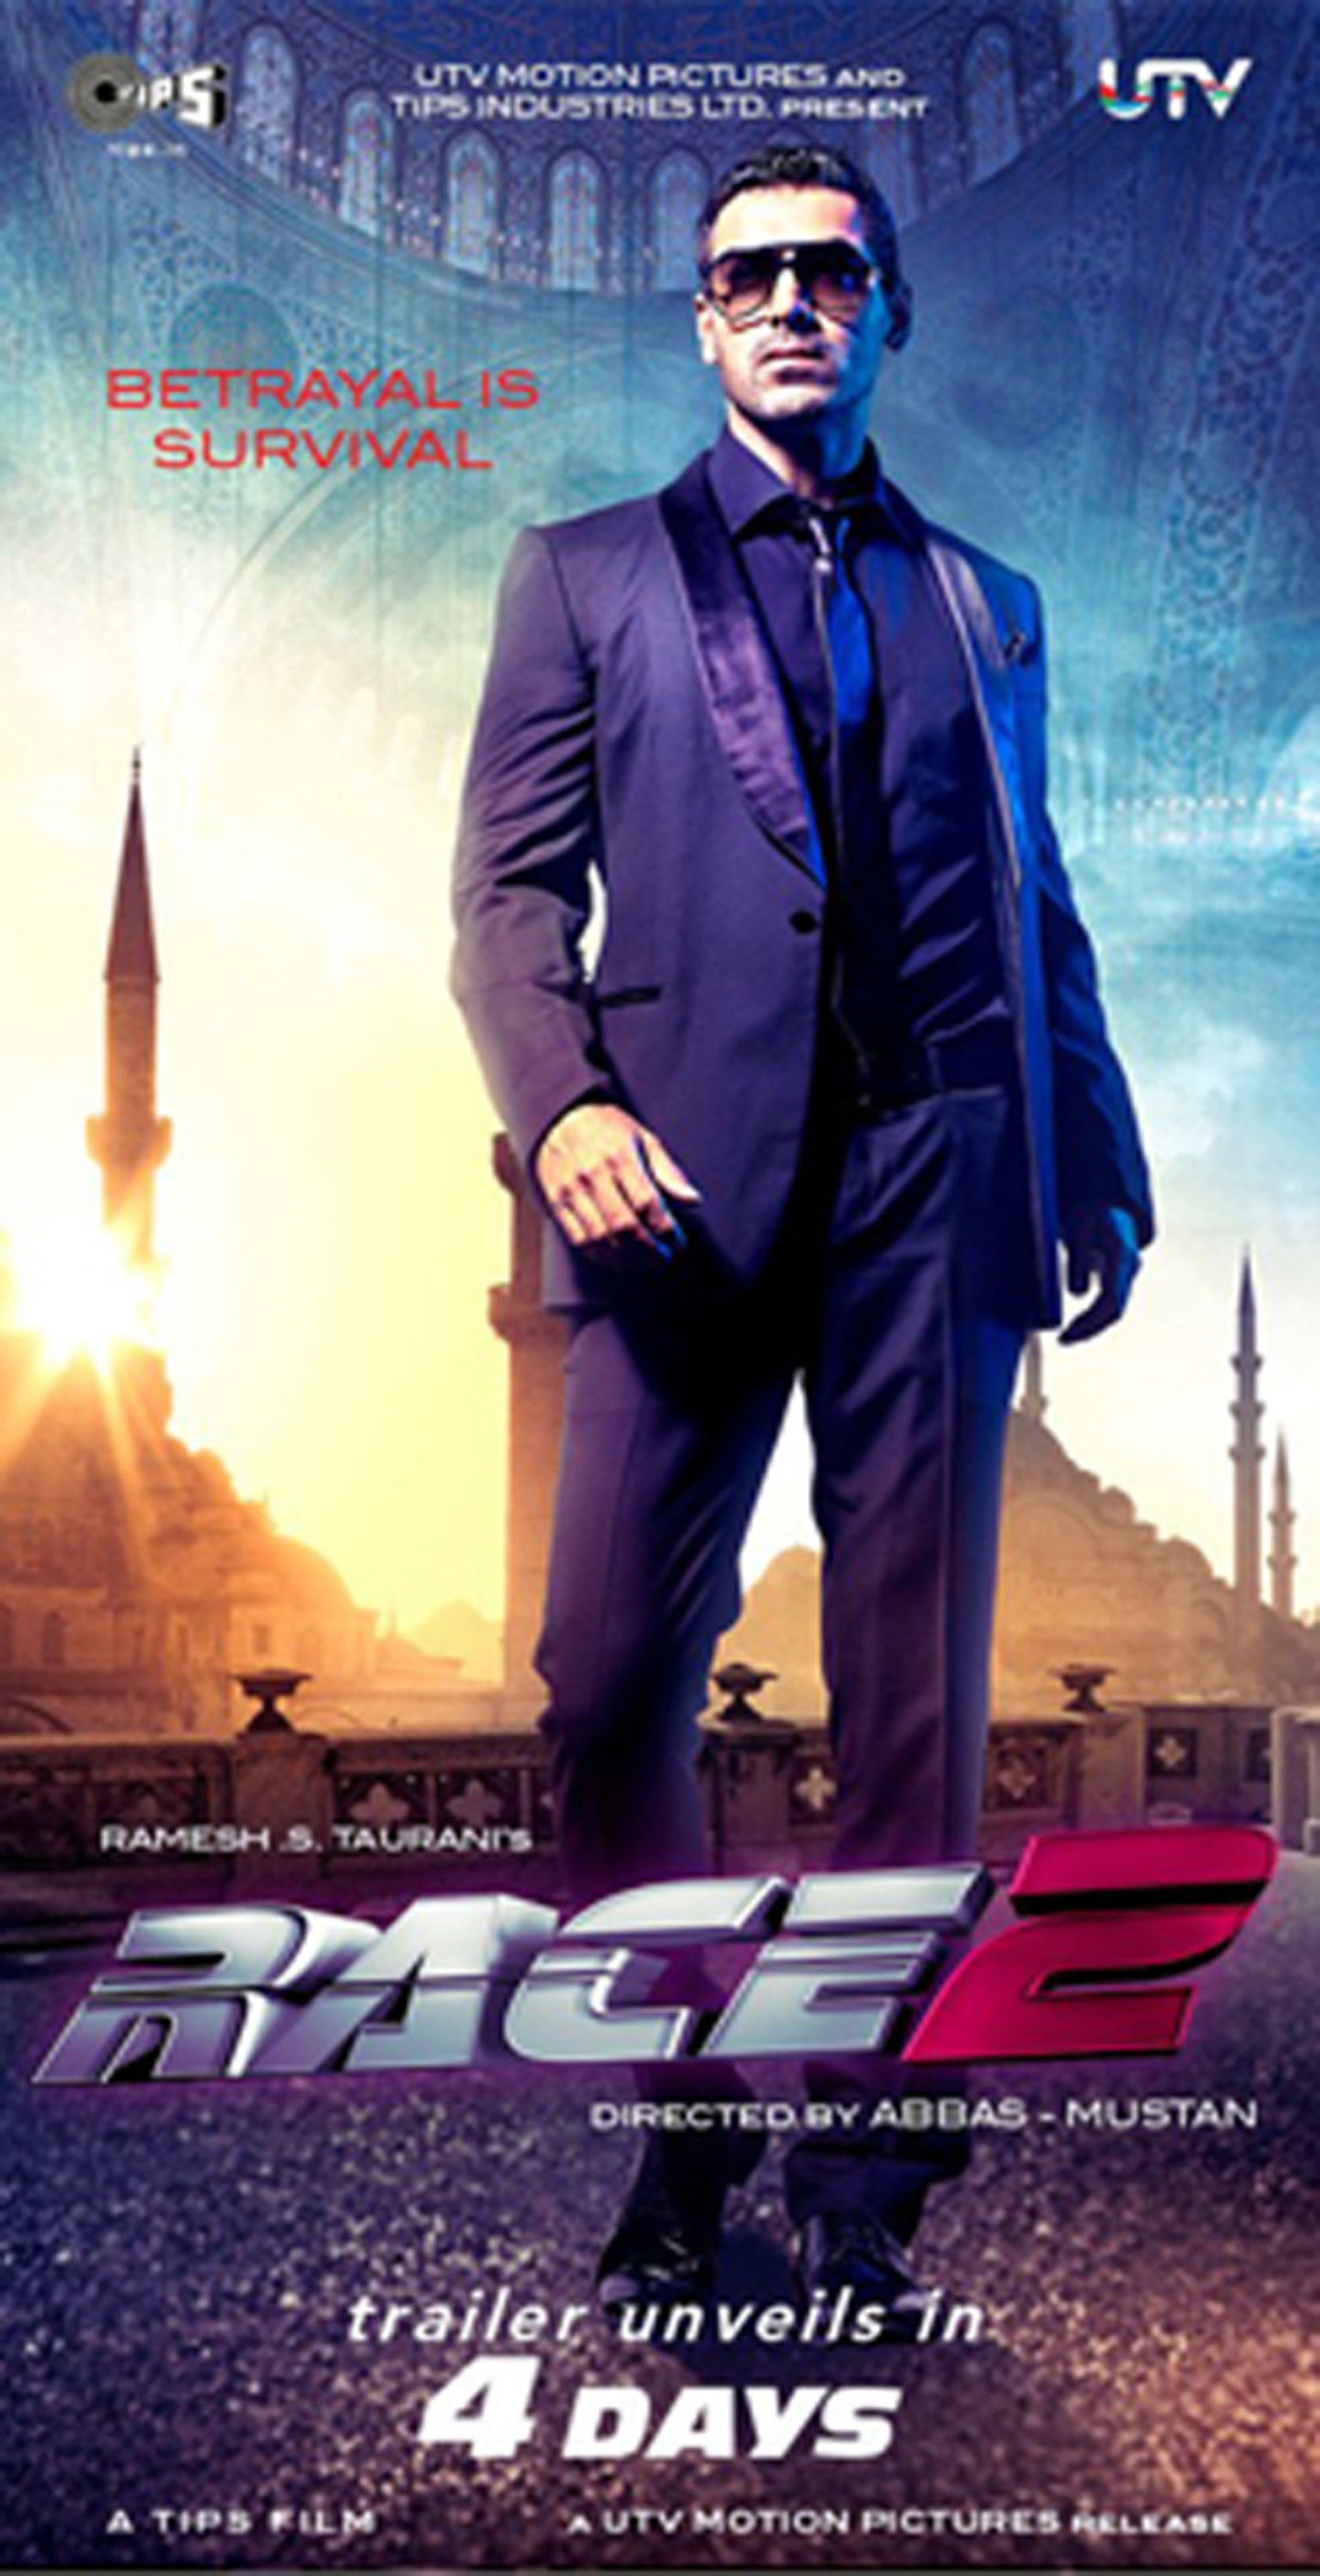 John Abraham Race 2 First Look : race 2 on Rediff Pages